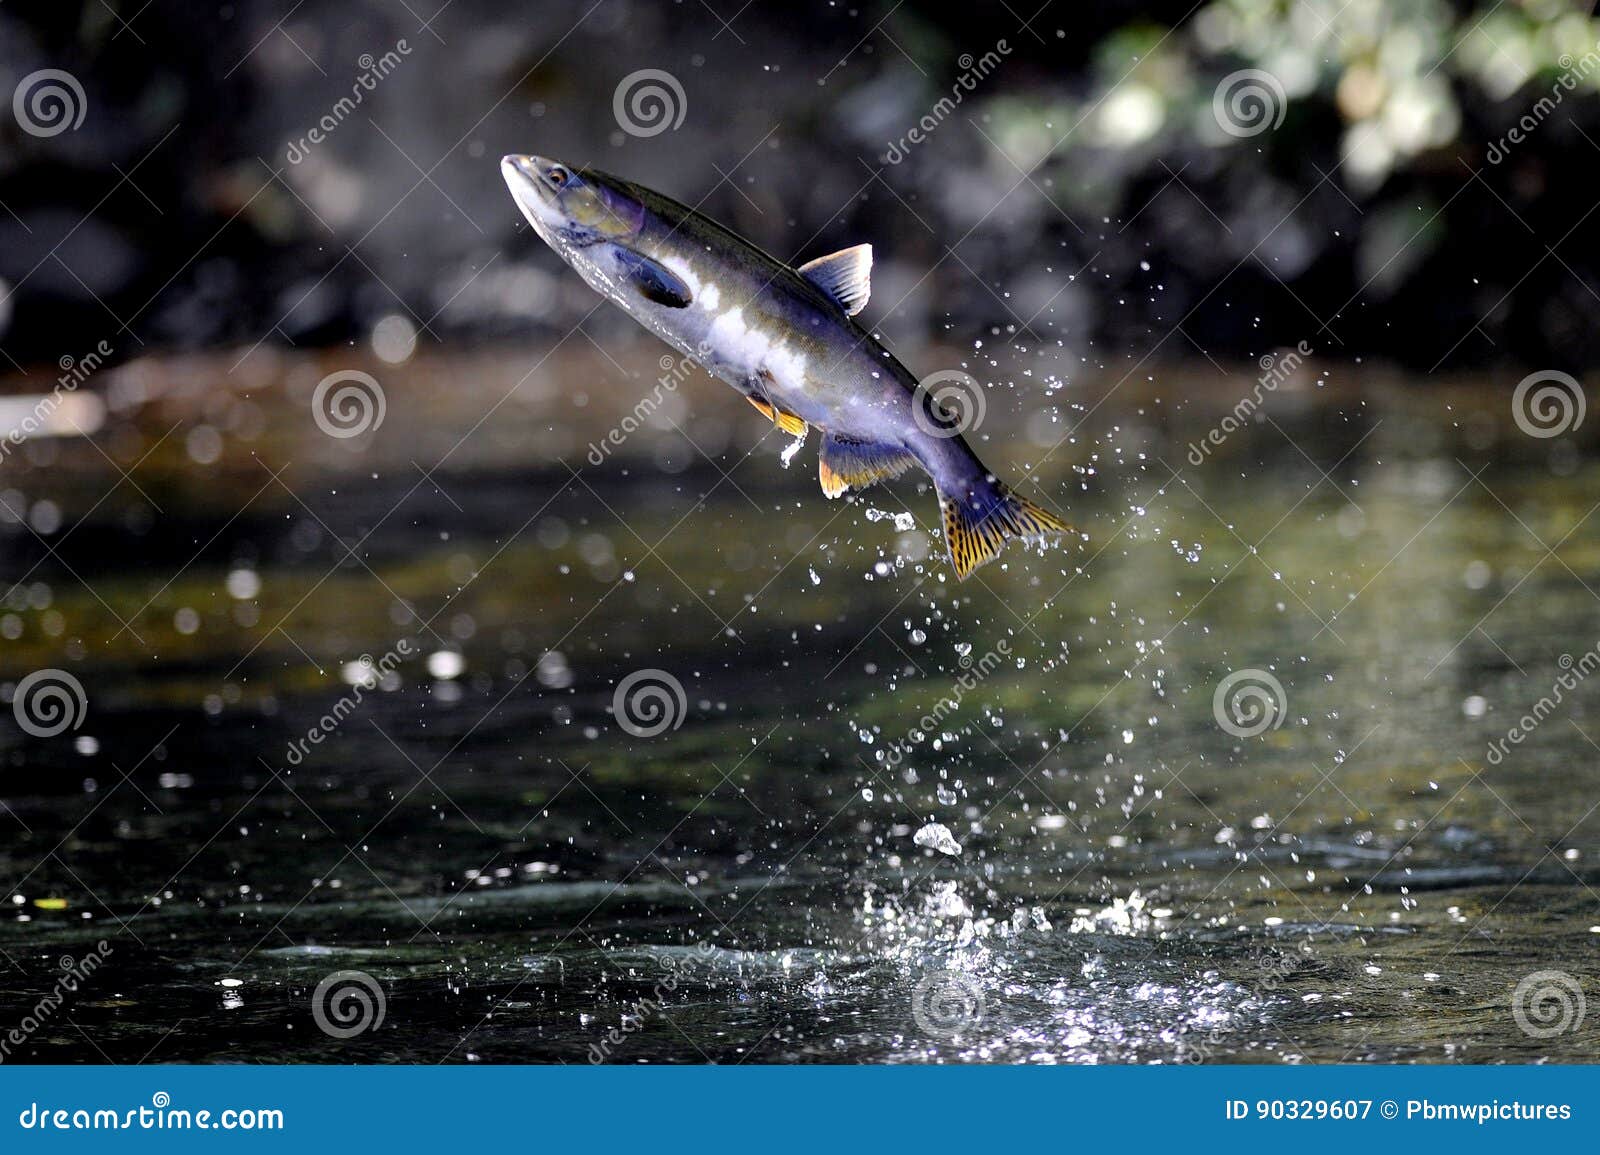 coho salmon jumping out of the pacific ocean